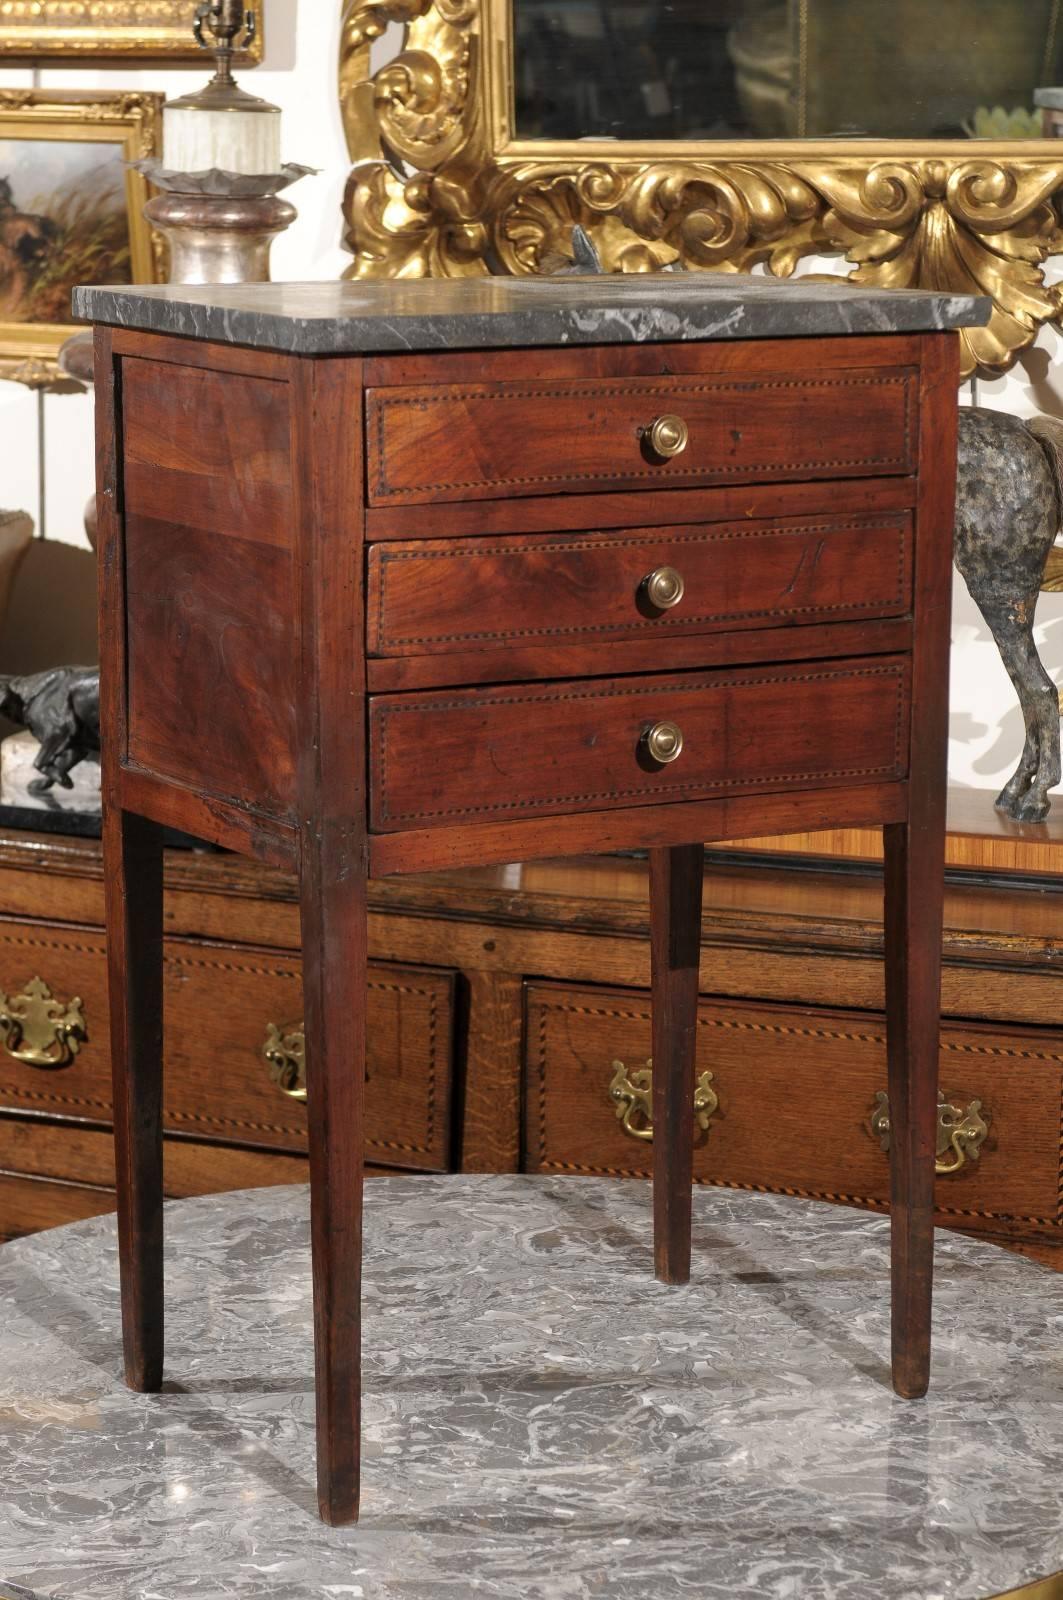 A petite French mid-19th century three-drawer commode. This French commode from circa 1830 features a rectangular grey veined marble top over three nicely hand-carved dovetailed drawers with delicate banding and round brass pulls. This delicate